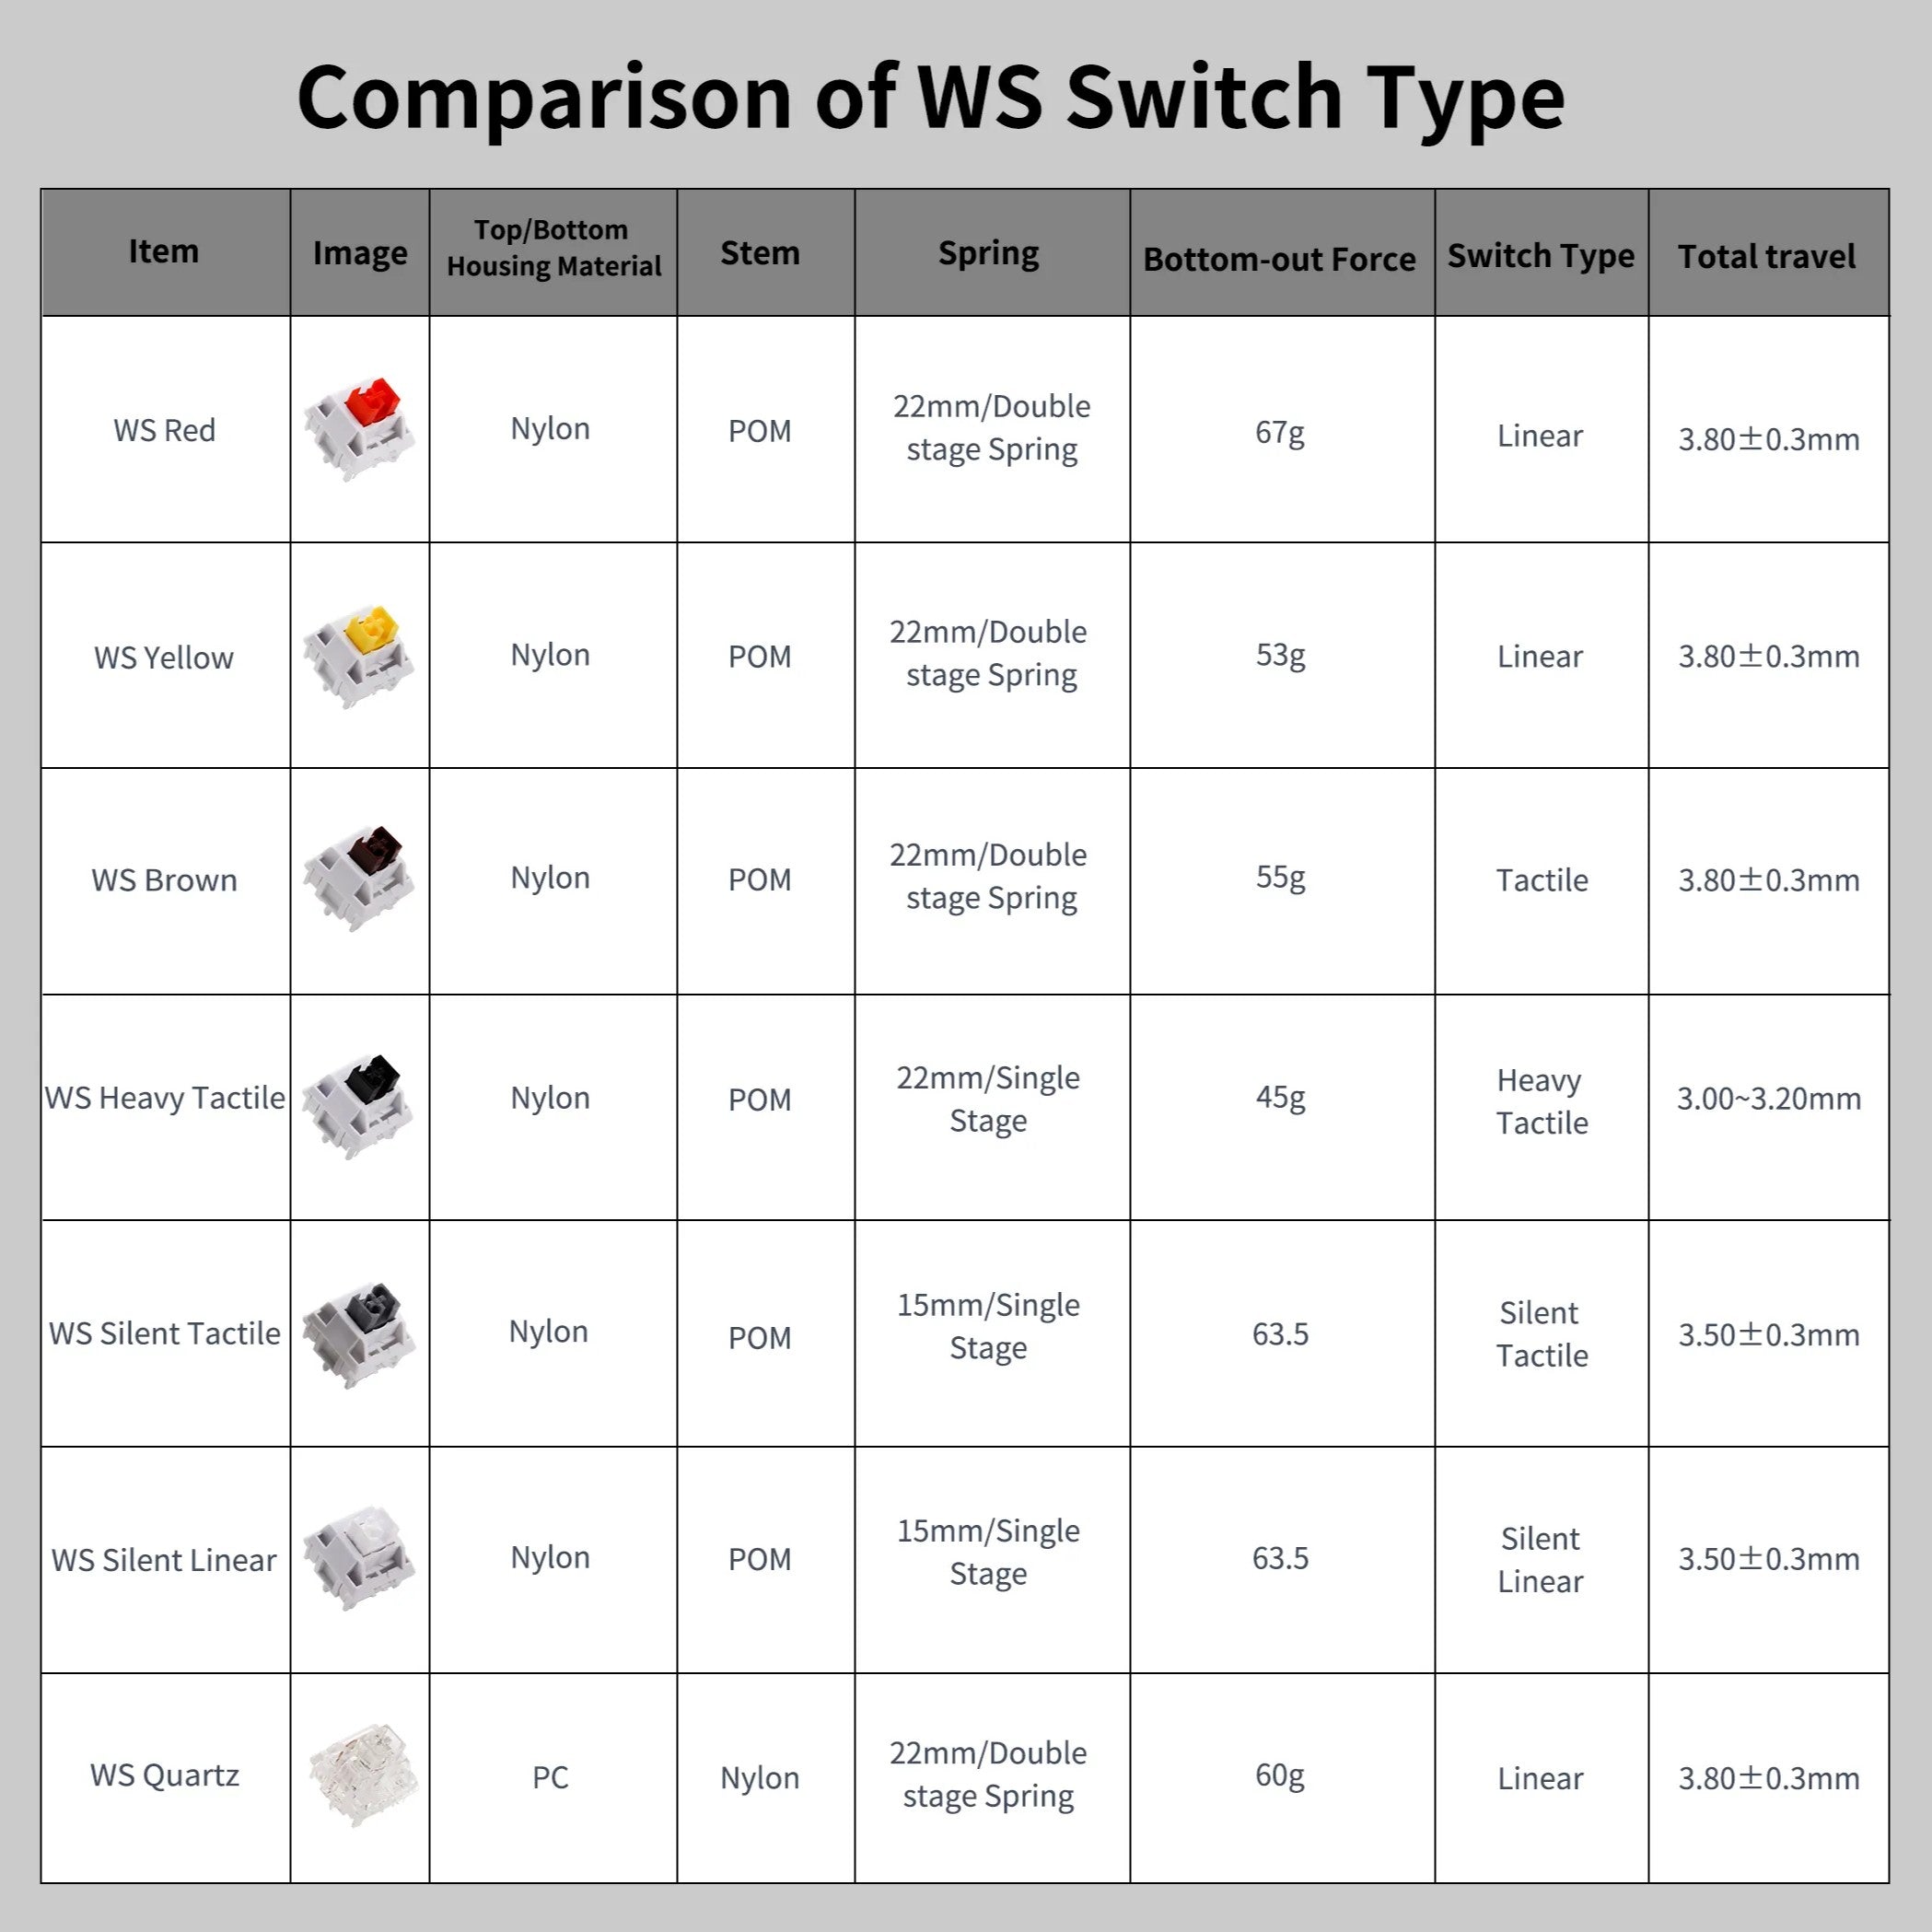 WS Heavy Tactile Switch